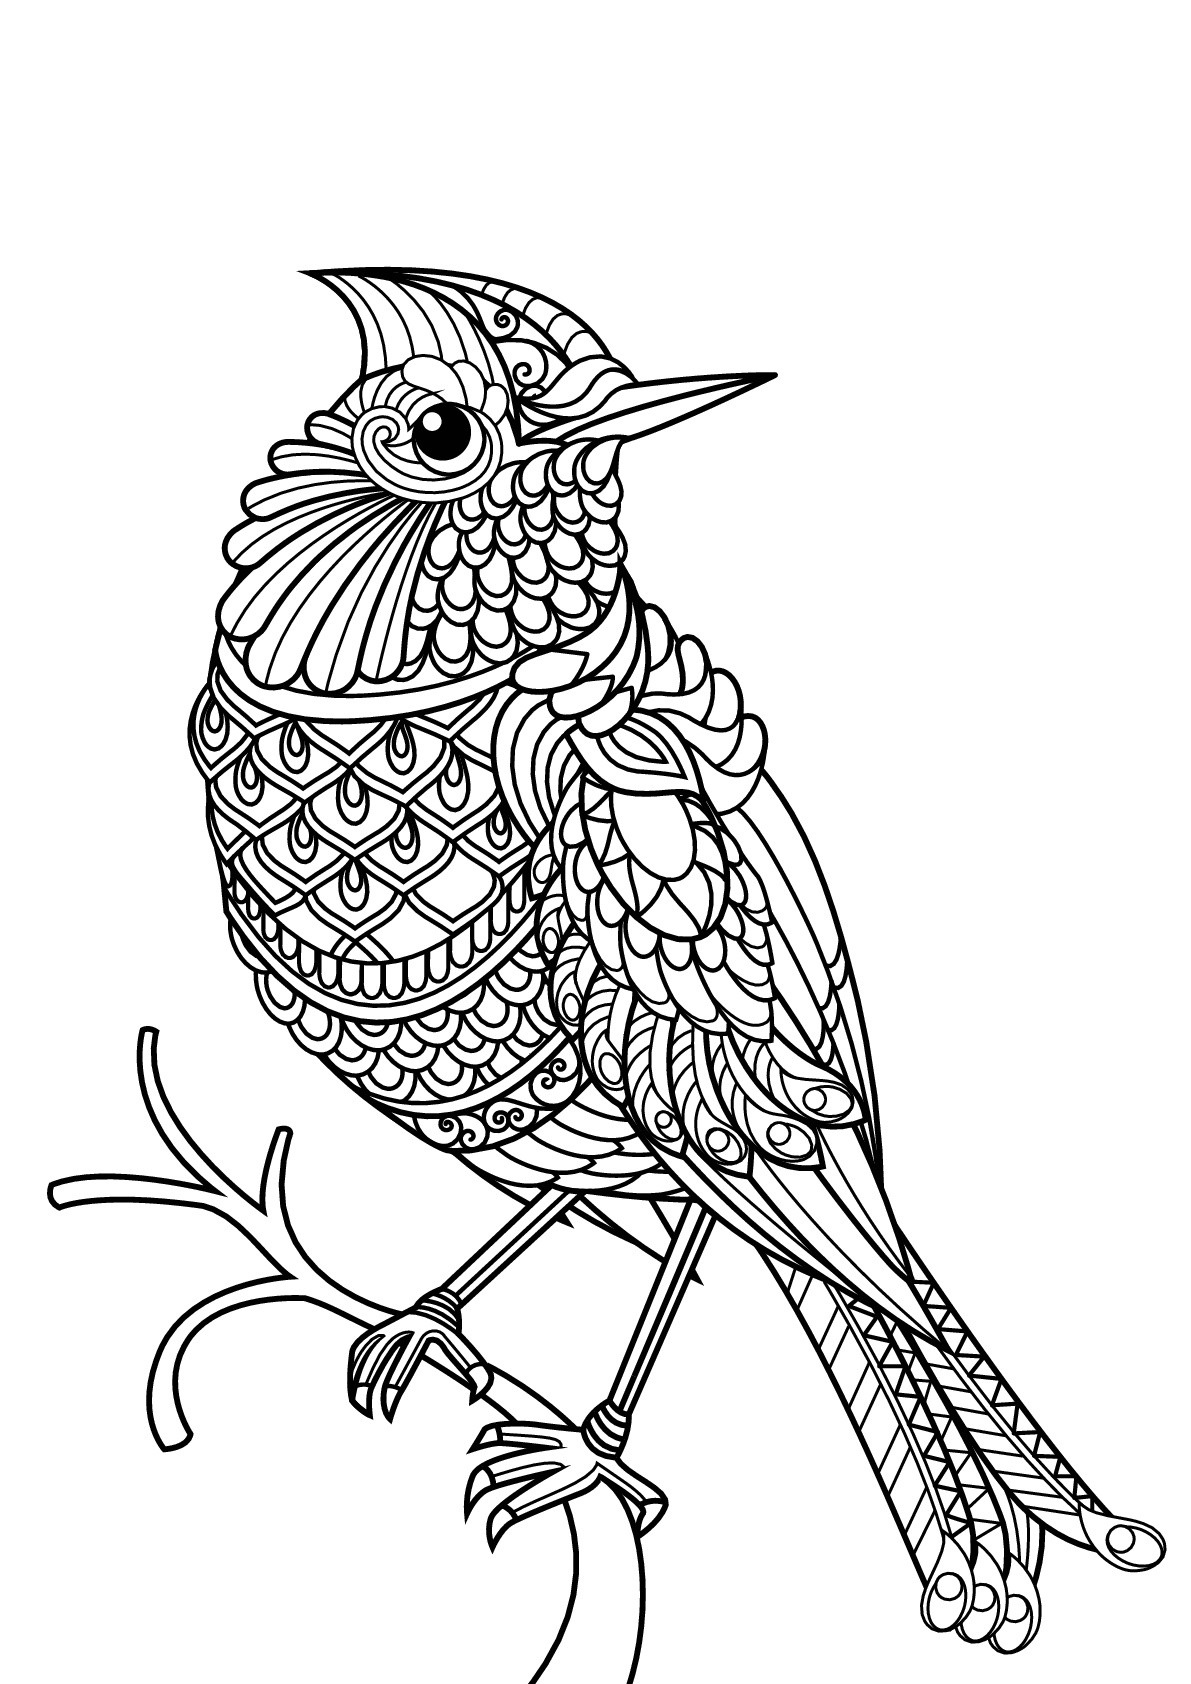 Adult Coloring Pages Birds
 Free book bird Birds Adult Coloring Pages